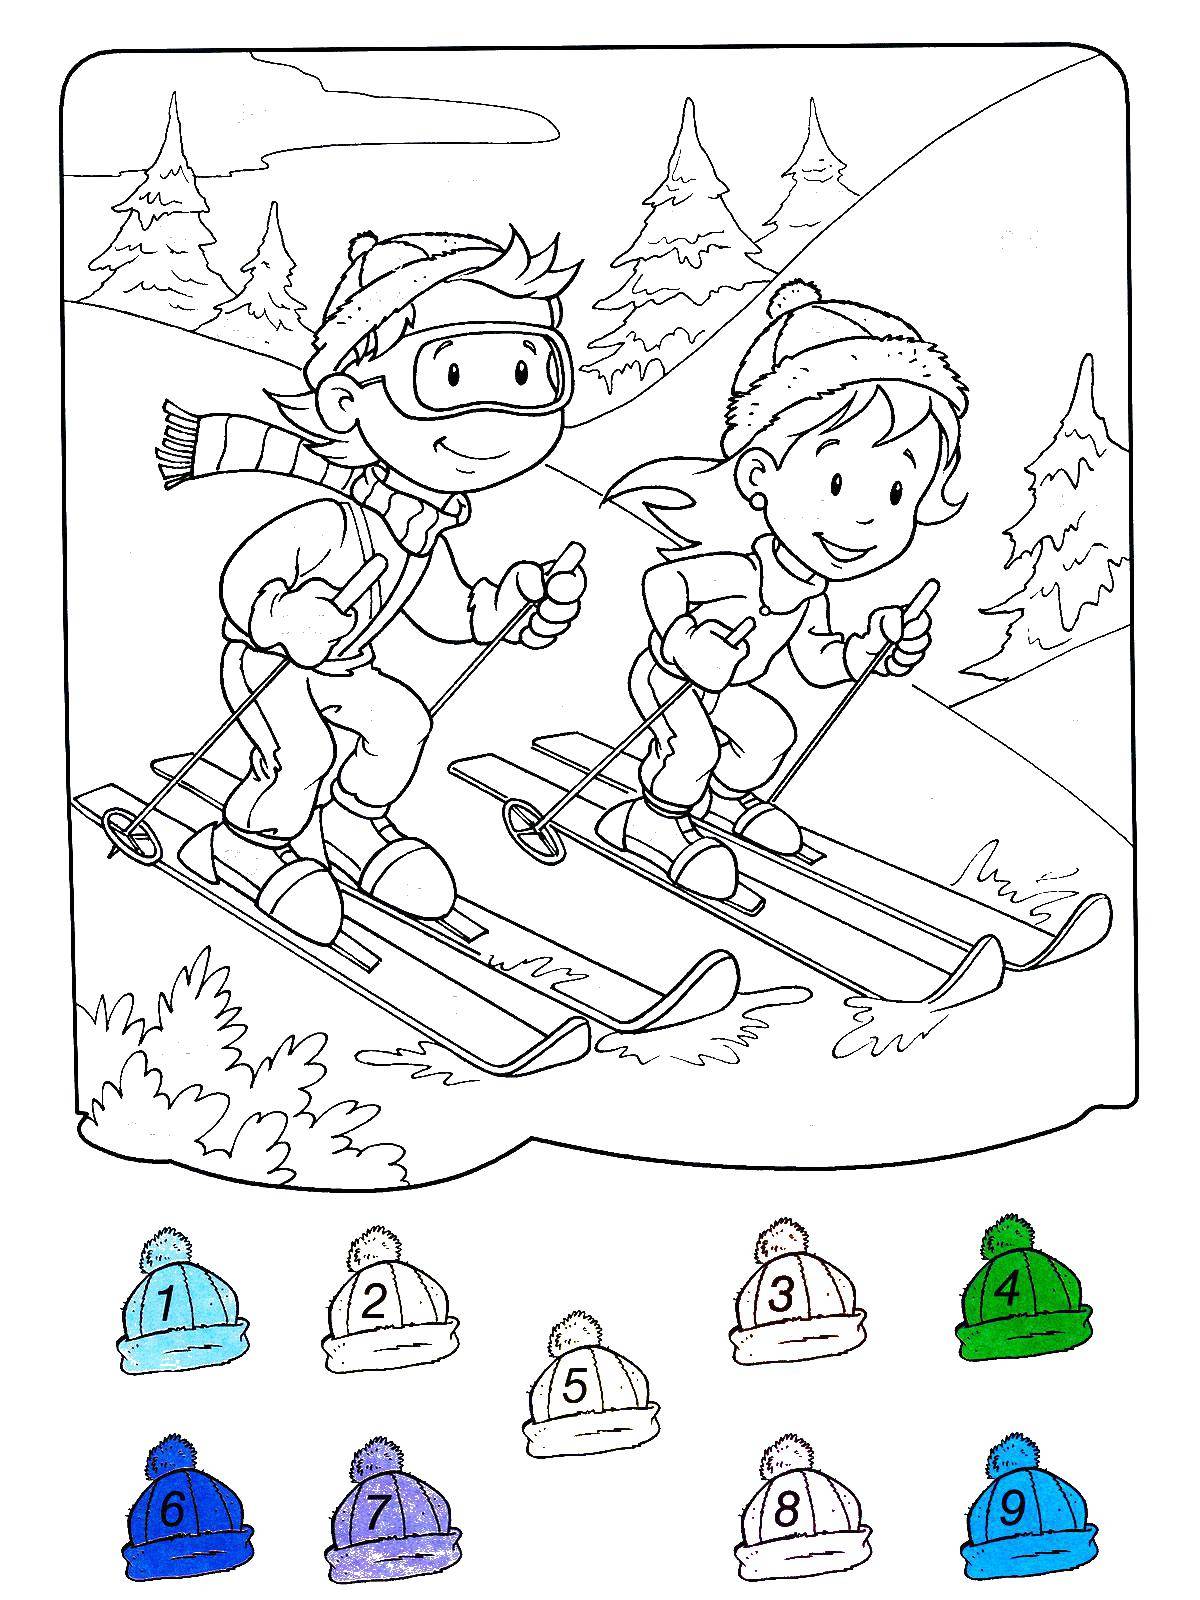 Coloring Skiing. Category sports. Tags:  sport, athletes, ski, winter.